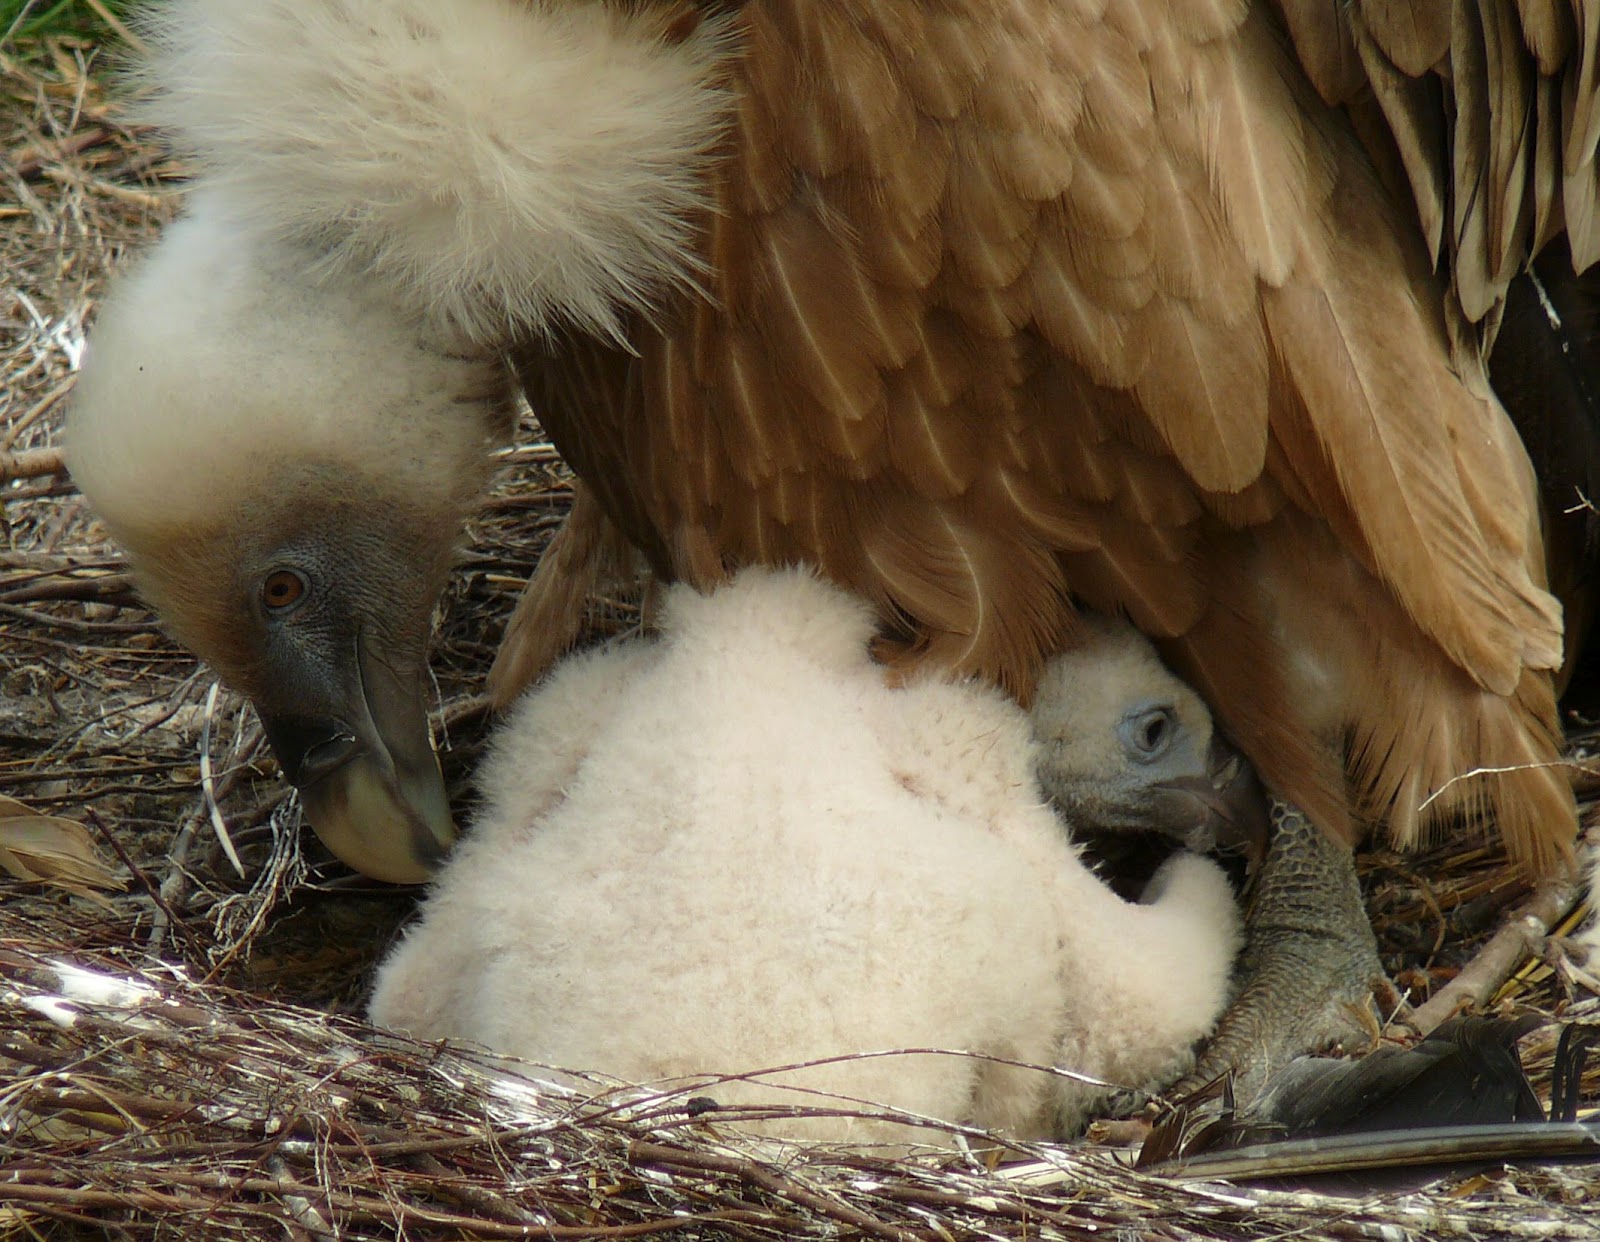 Fascinated by Vultures: 21 days old Eurasian Griffon Vulture chick